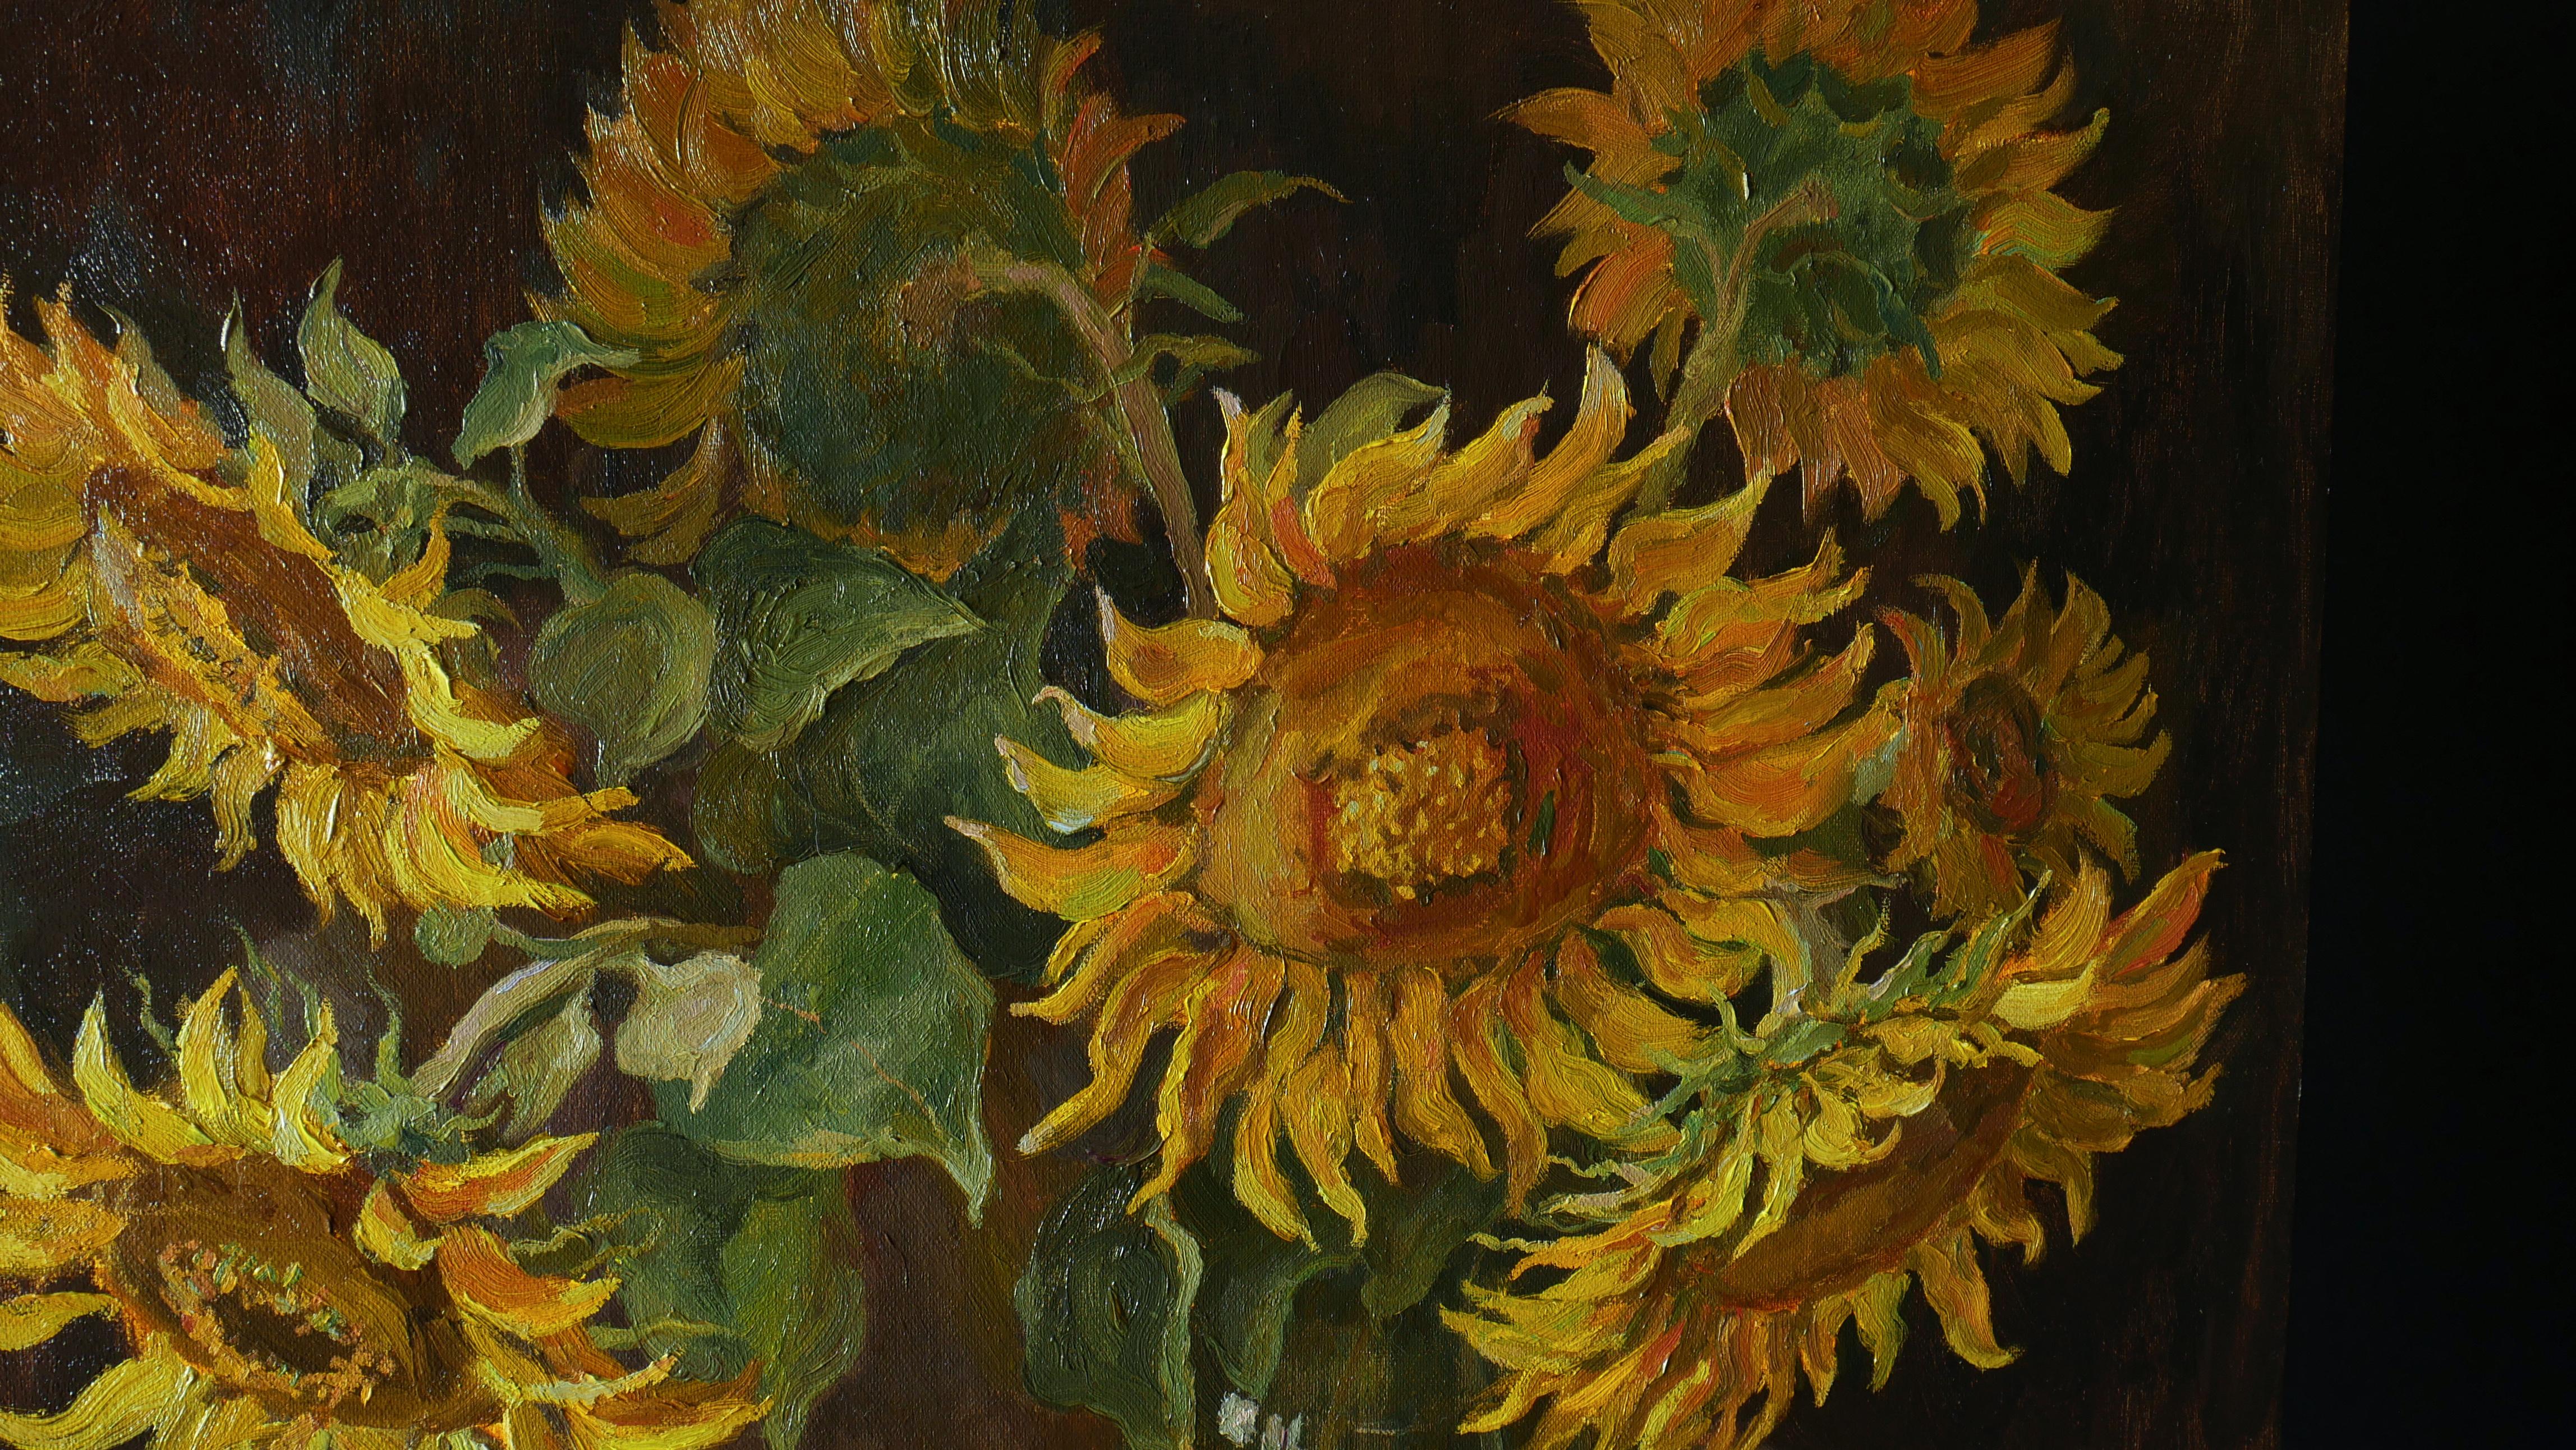 Sunny floral still life with sunflowers in vase is wonderful and stylish home decor. Don't miss the chance to purchase an original professional product.

The painting is author's and original. It is signed on the front and back.
The edges of the